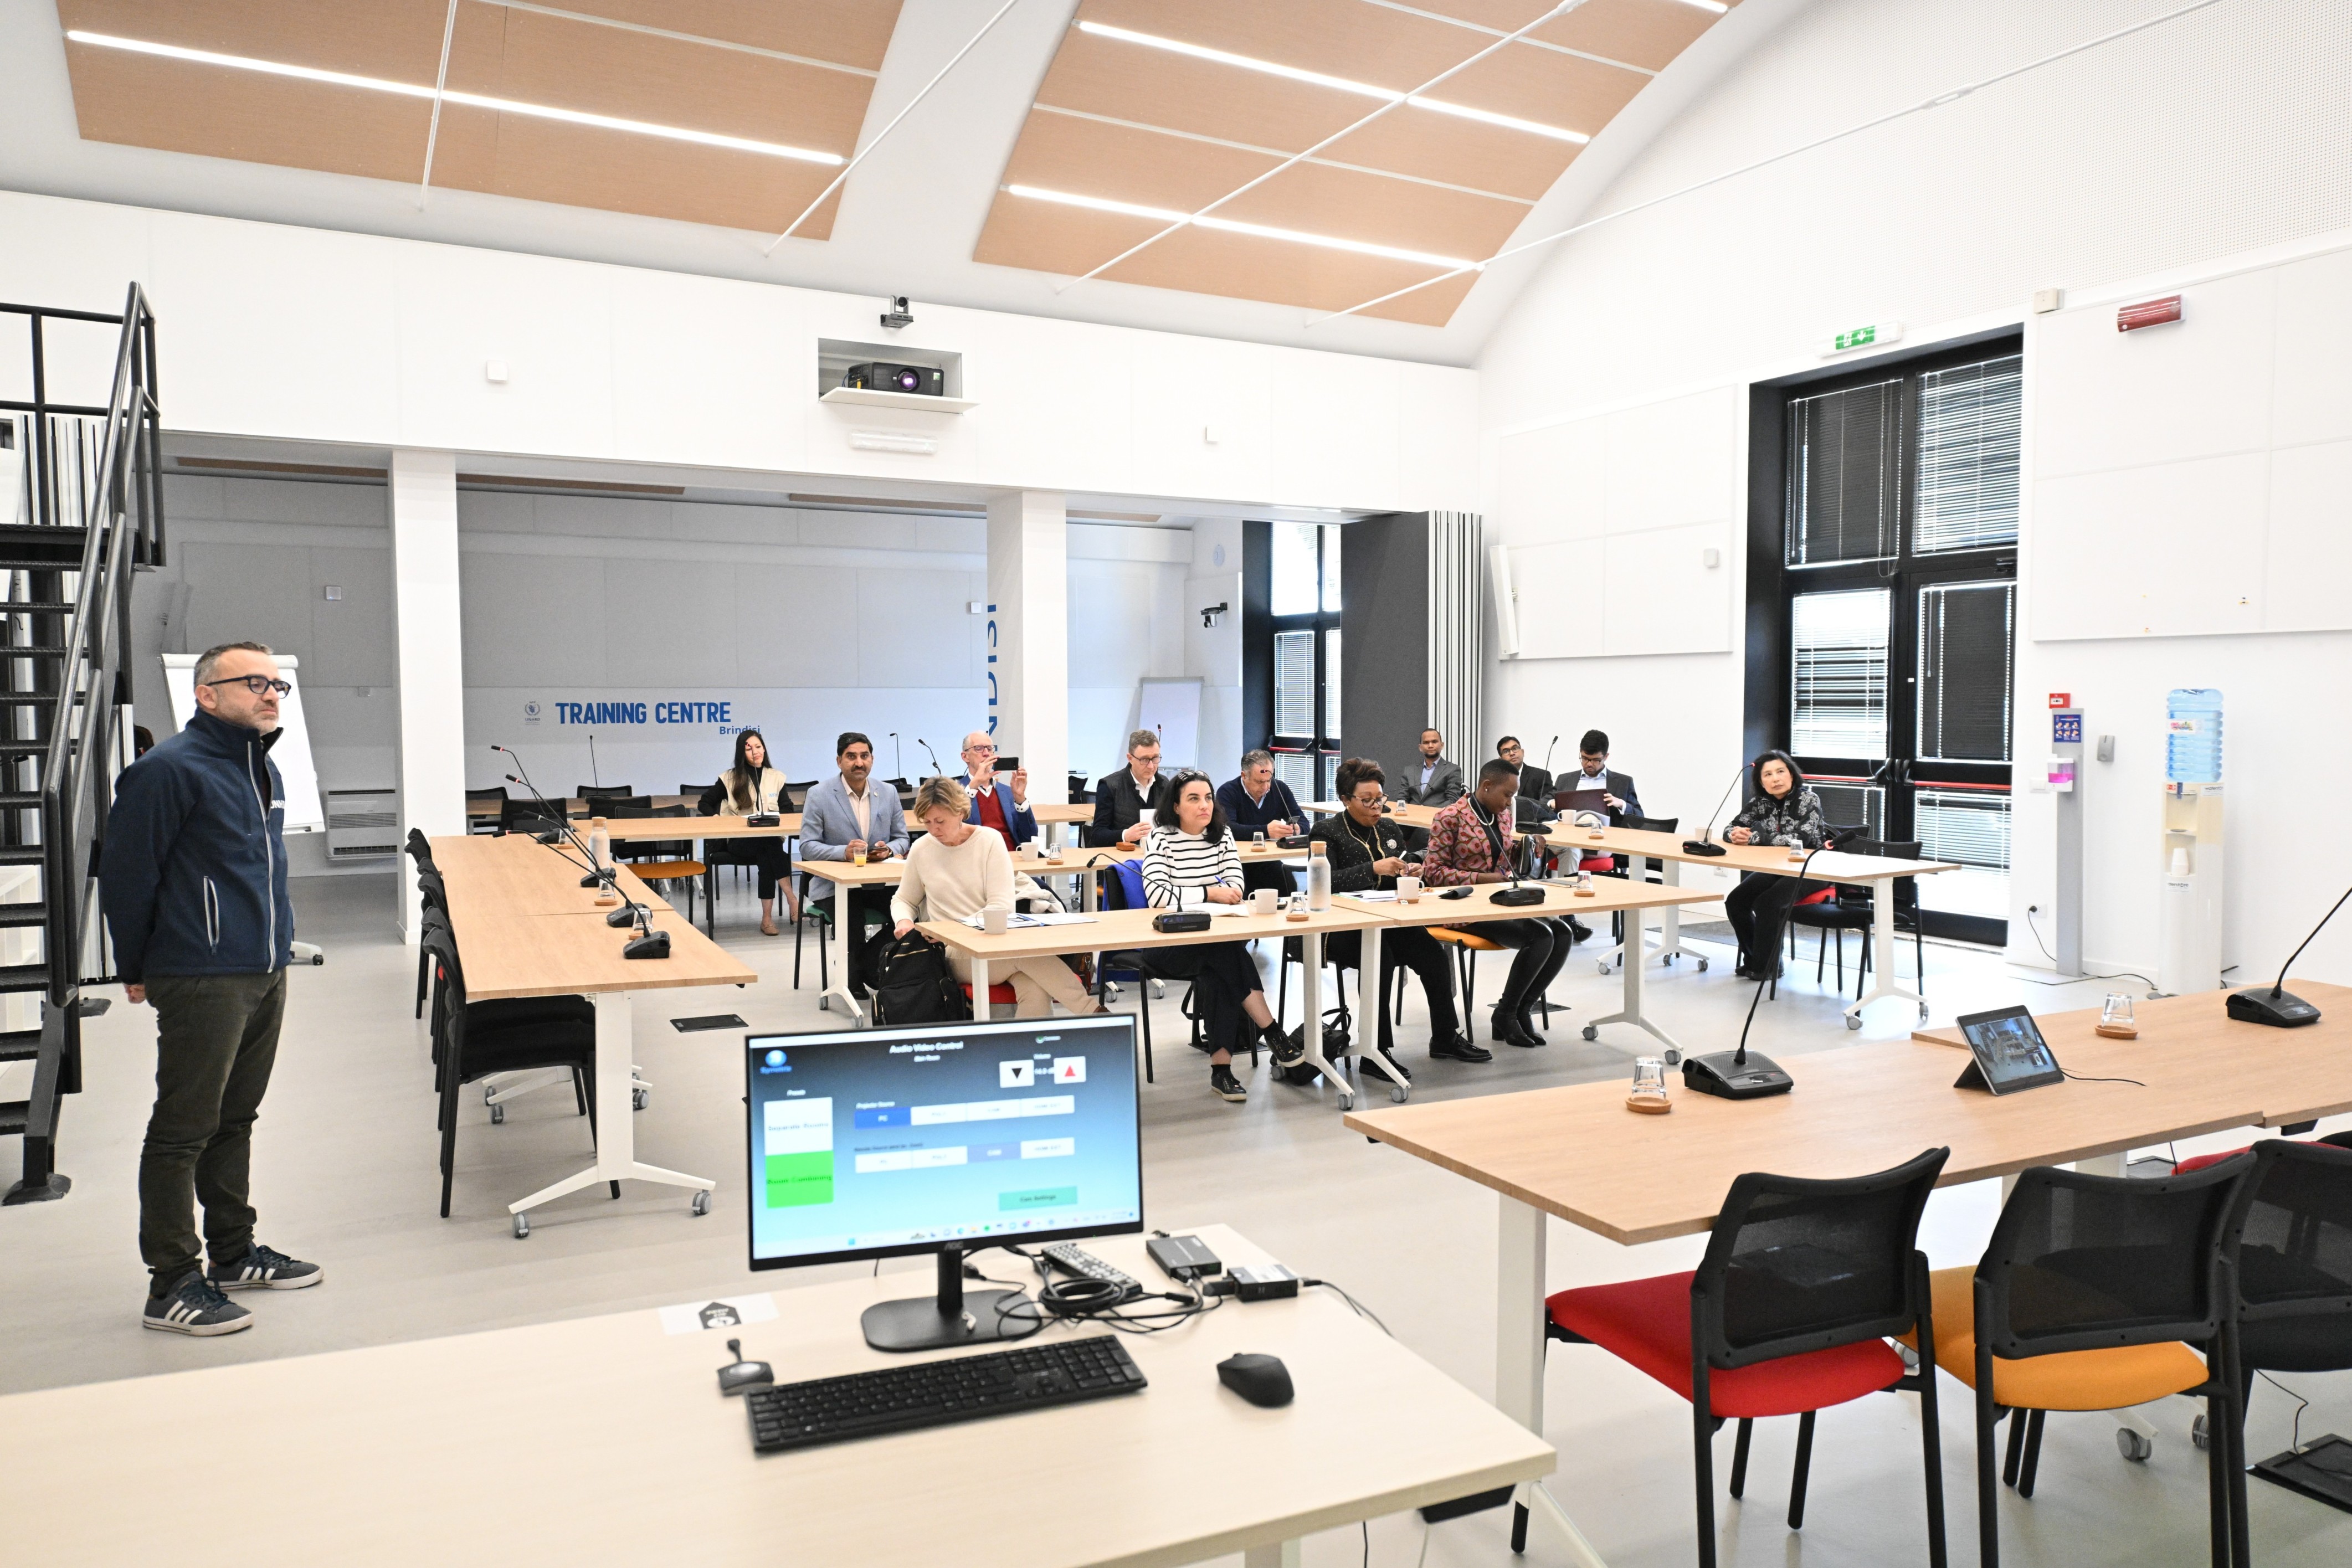 Figure 2: The delegation listened attentively to the welcome address by Walid Ibrahim, UNHRD Network Coordinator and Brindisi Hub Manager in a classroom-style setting at the training centre